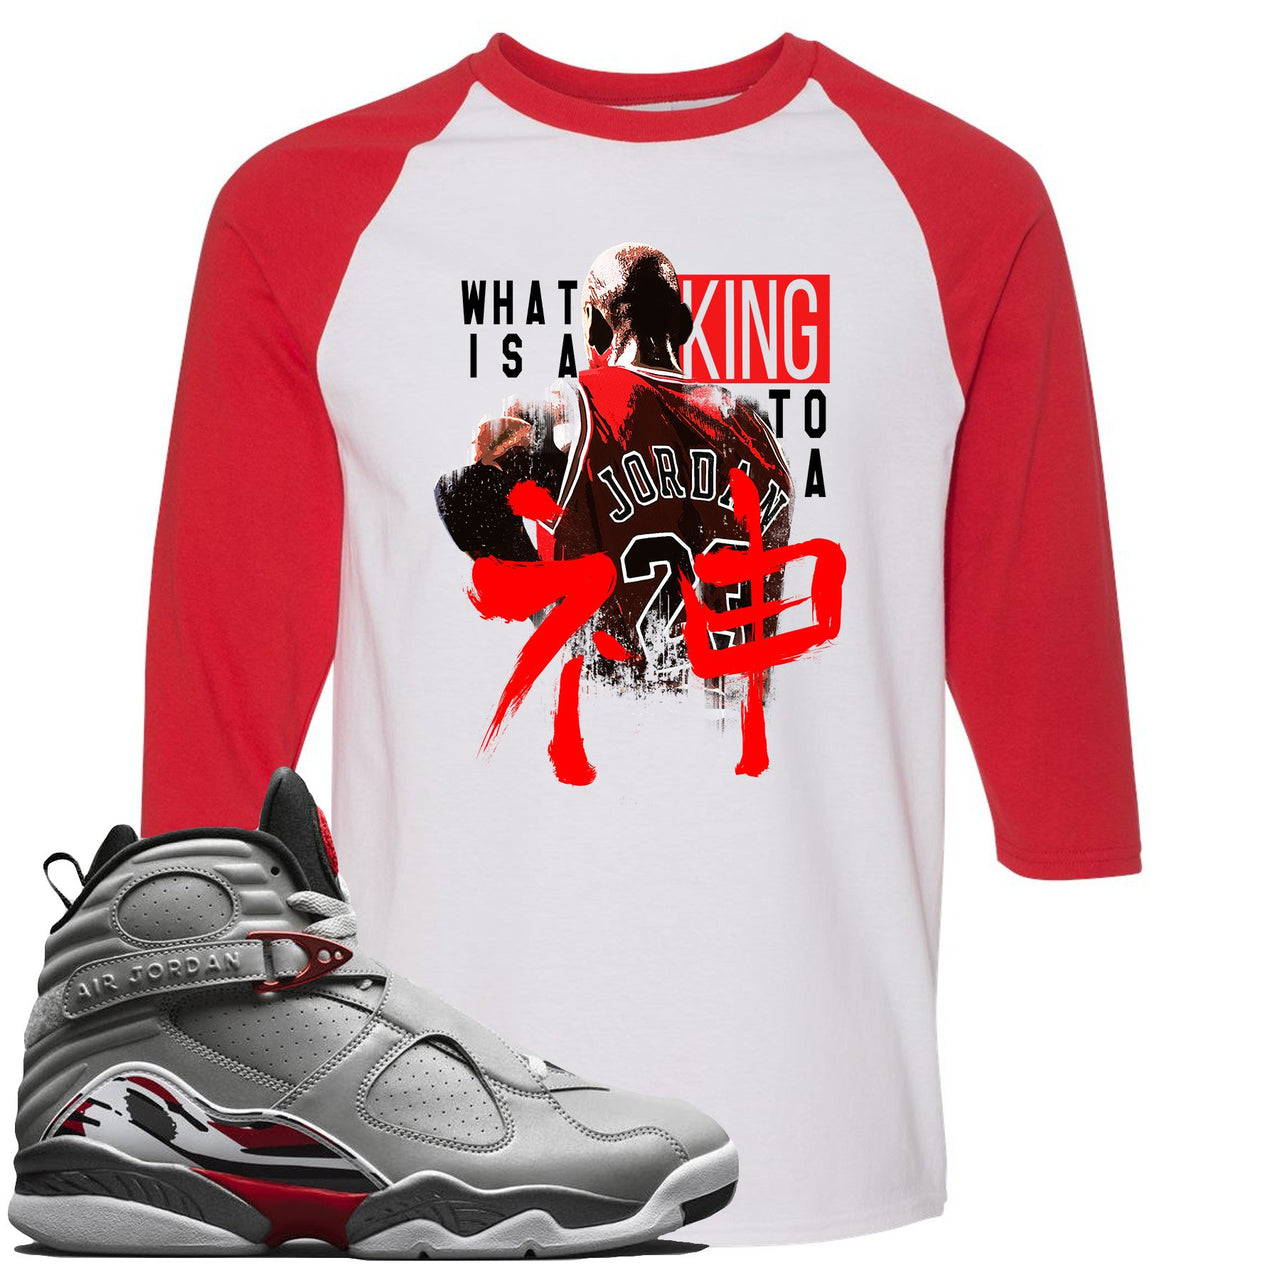 Reflections of a Champion 8s Raglan T Shirt | What Is A King To A God, White and Red